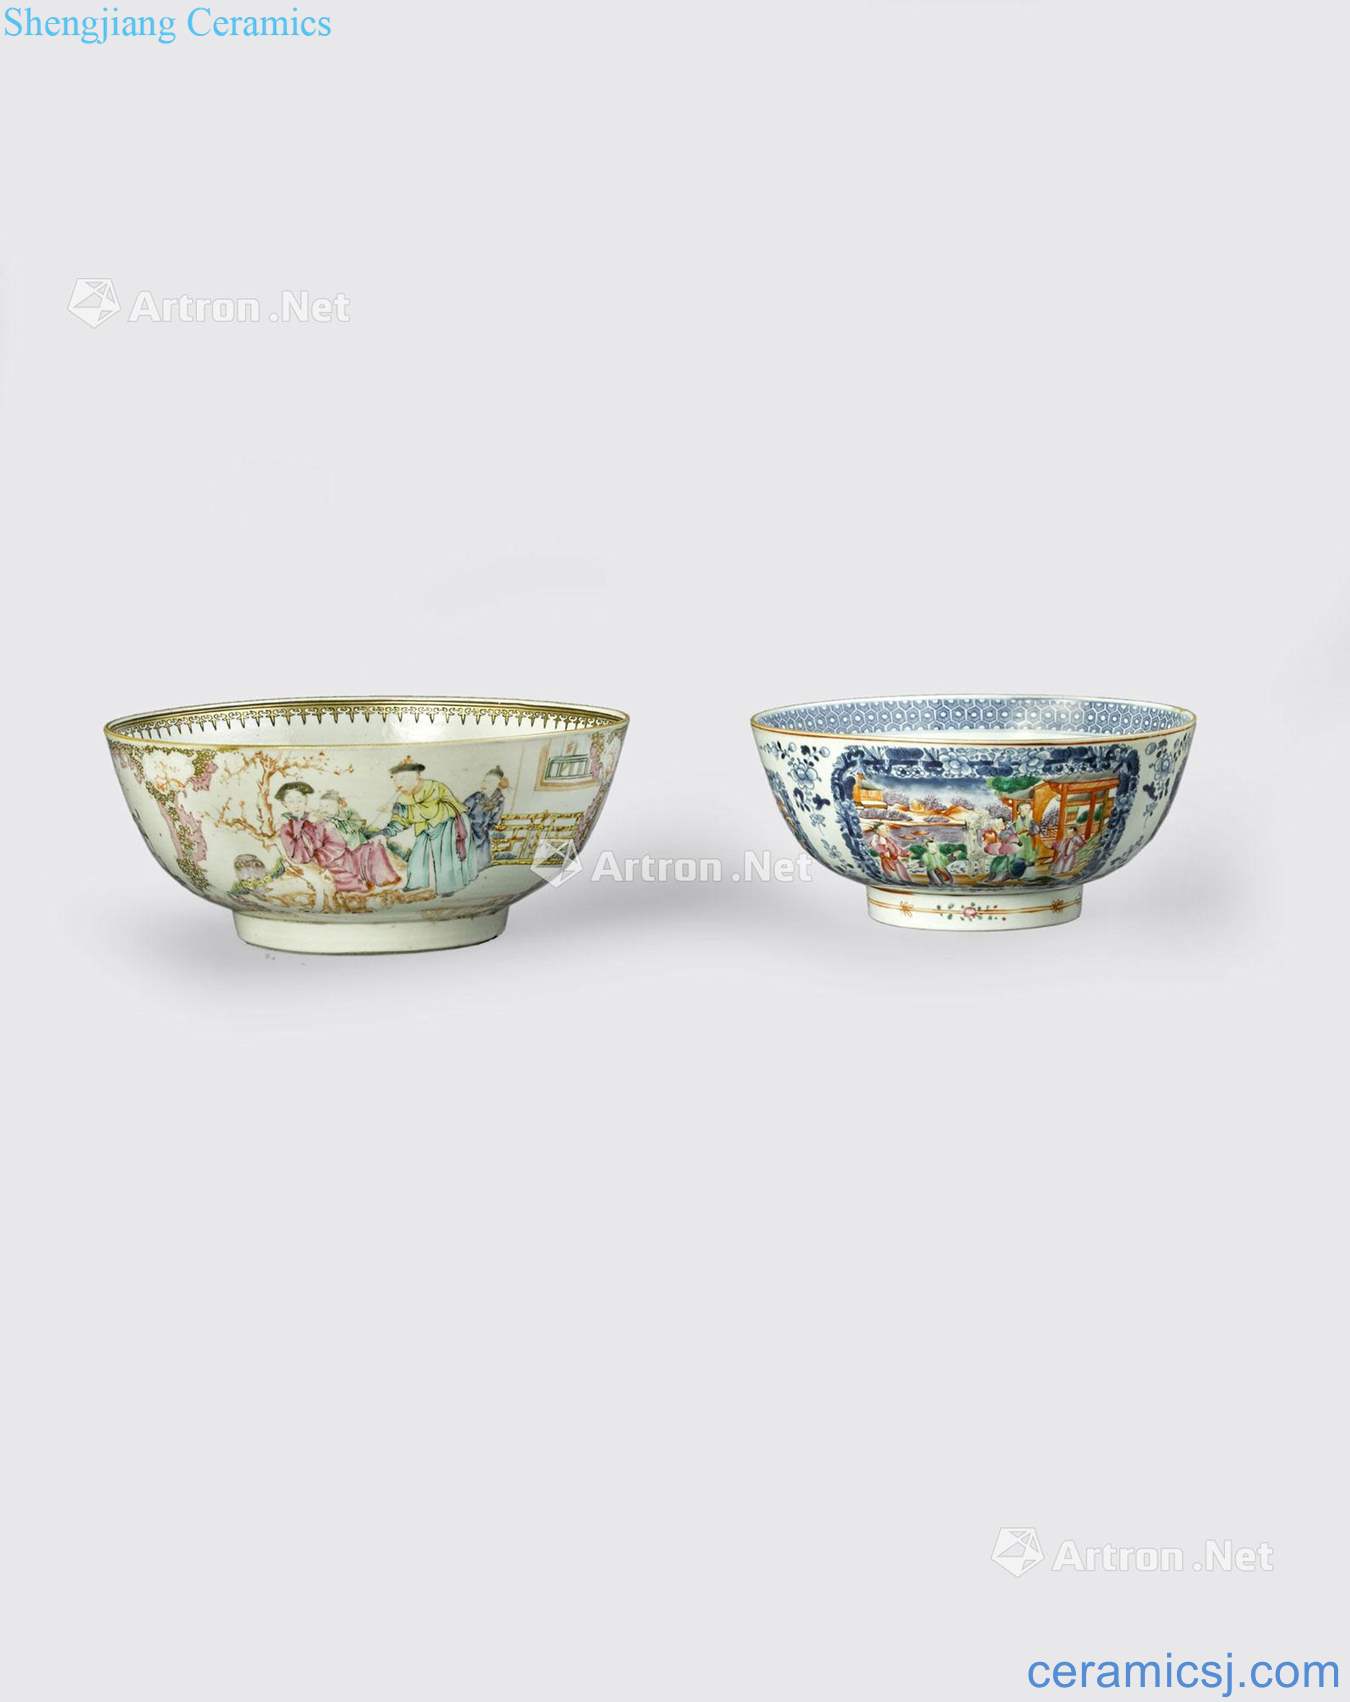 Newest 18 th/early 19 th century TWO FAMILLE ROSE ENAMELED EXPORT PORCELAIN BOWLS